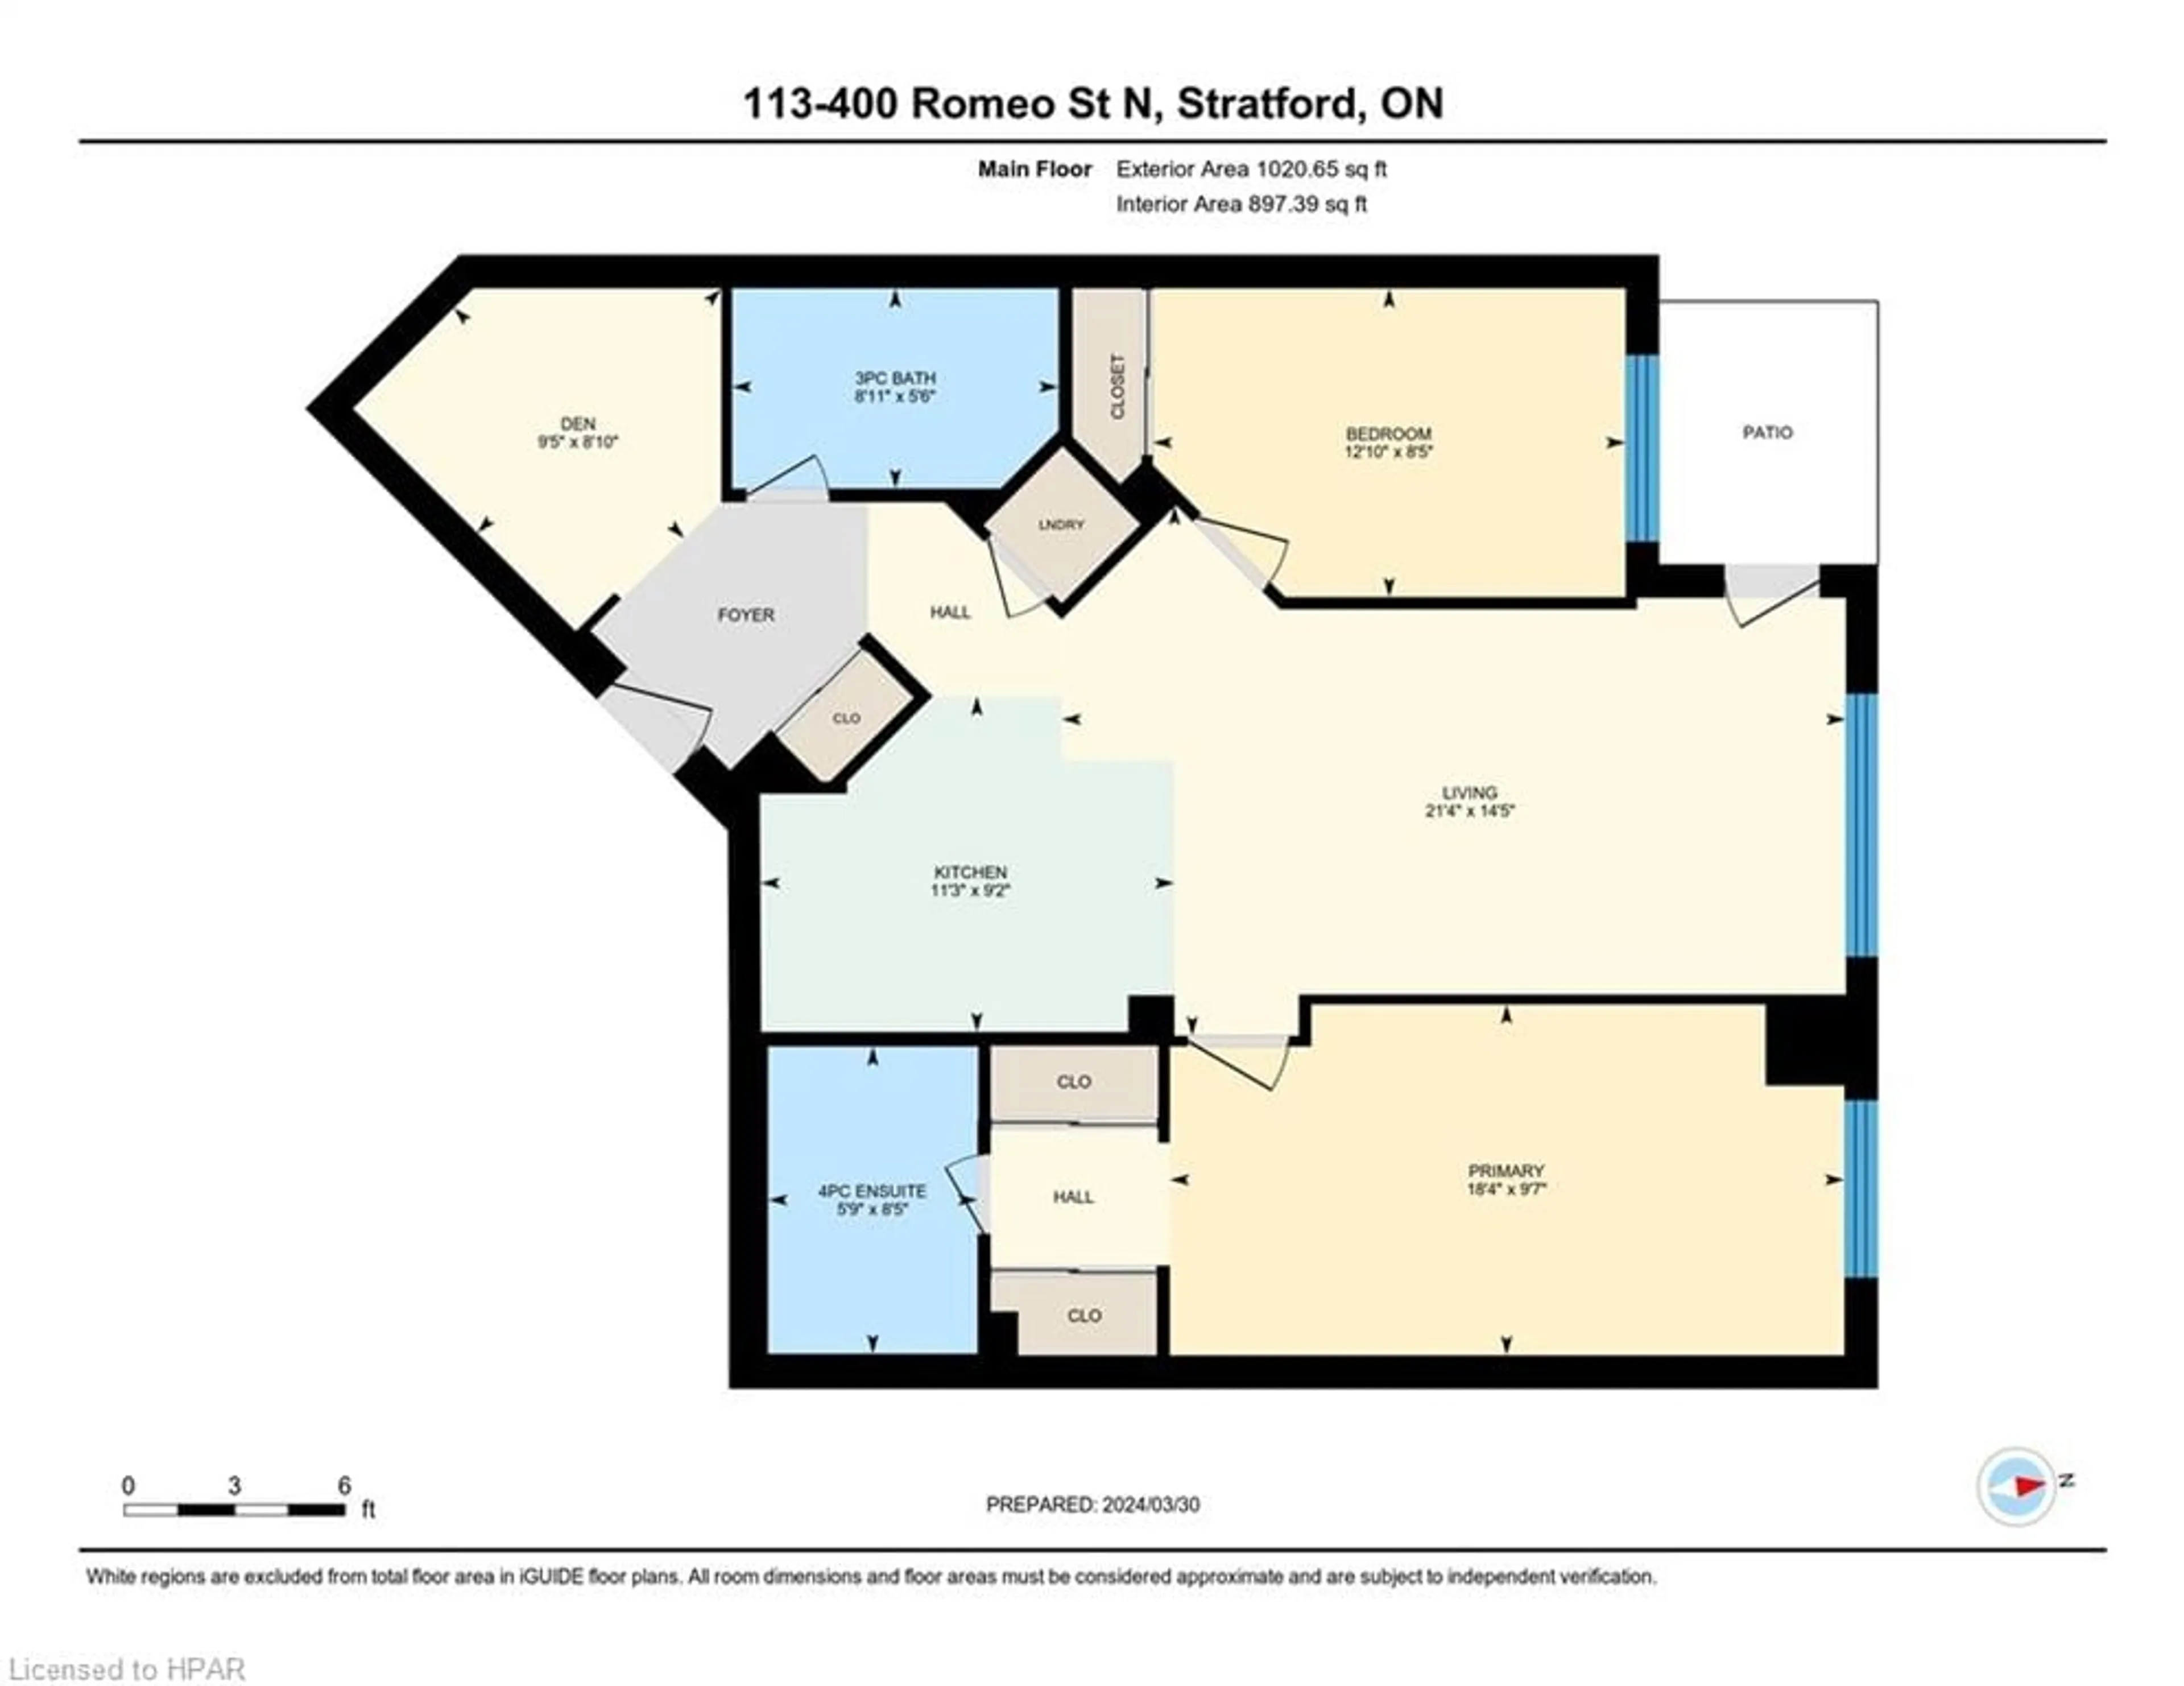 Floor plan for 400 Romeo St #113, Stratford Ontario N5A 0A2